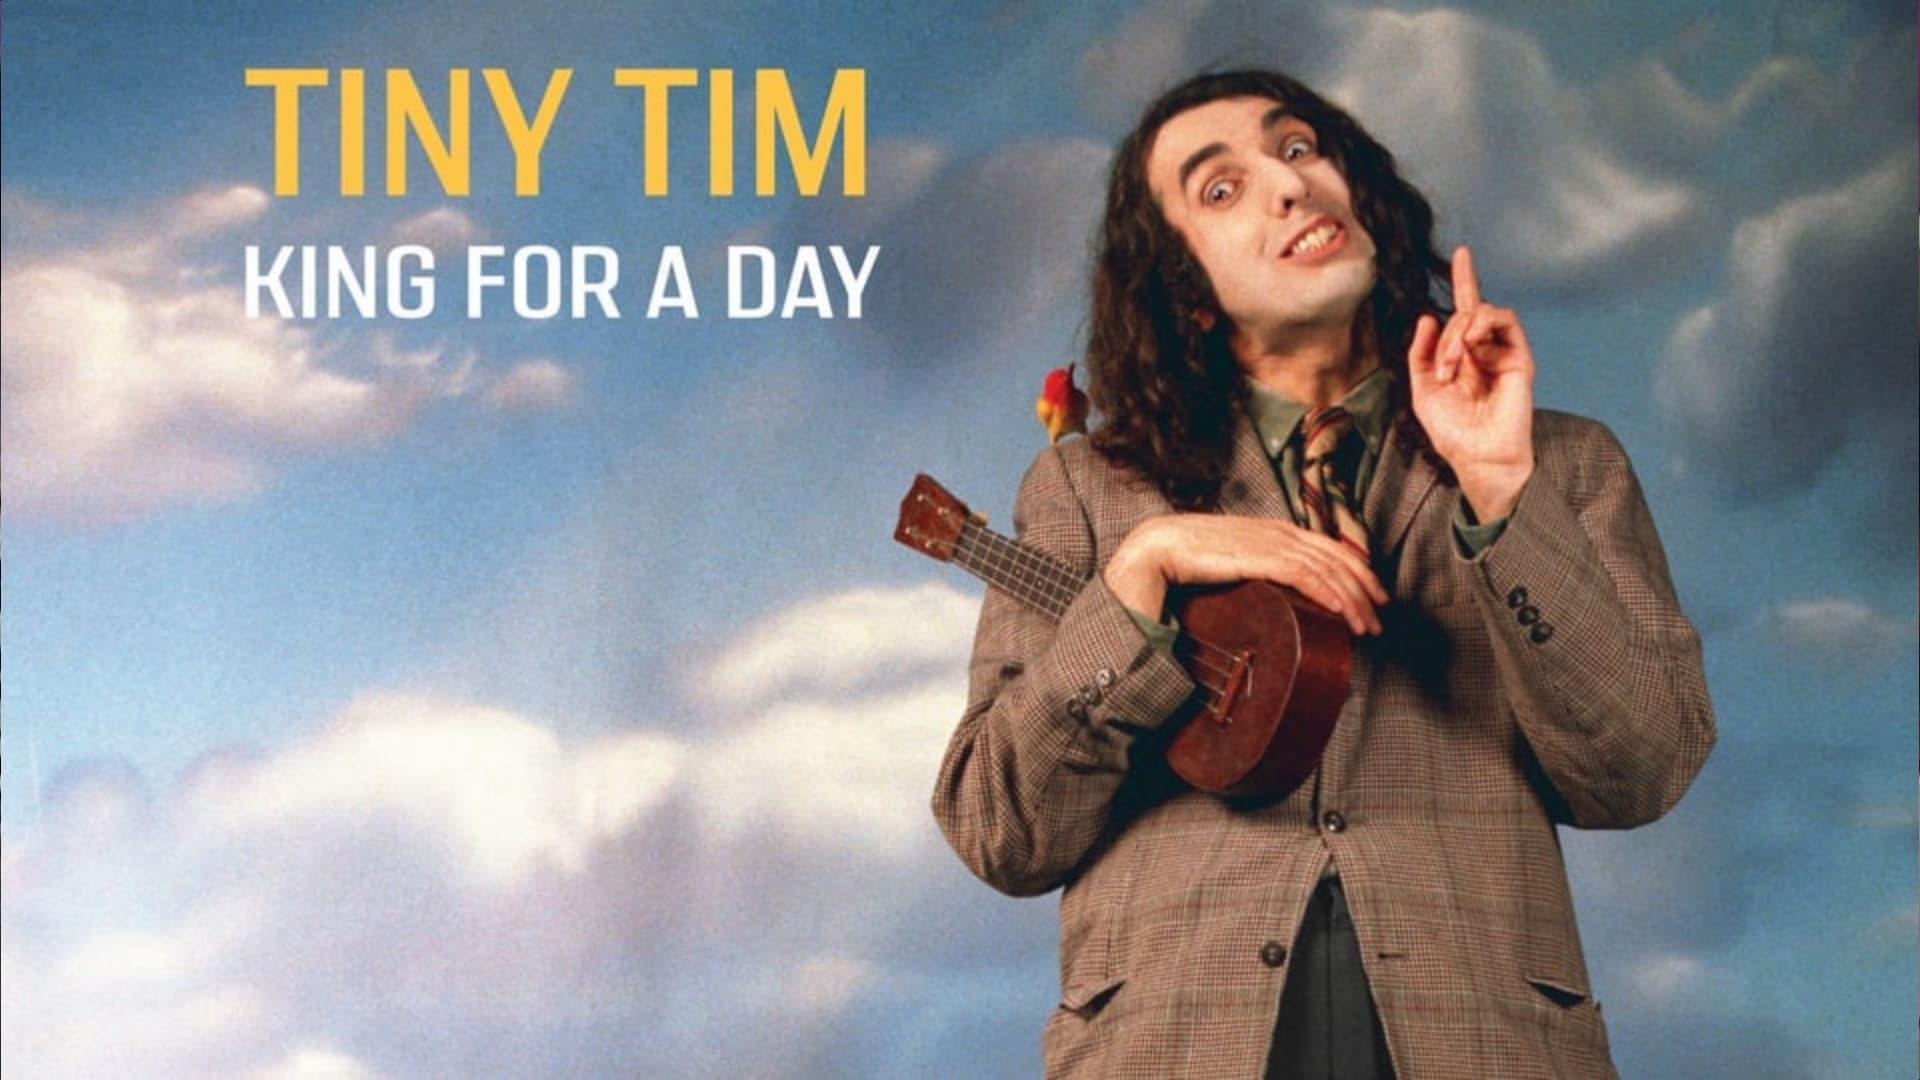 Tiny Tim: King for a Day backdrop